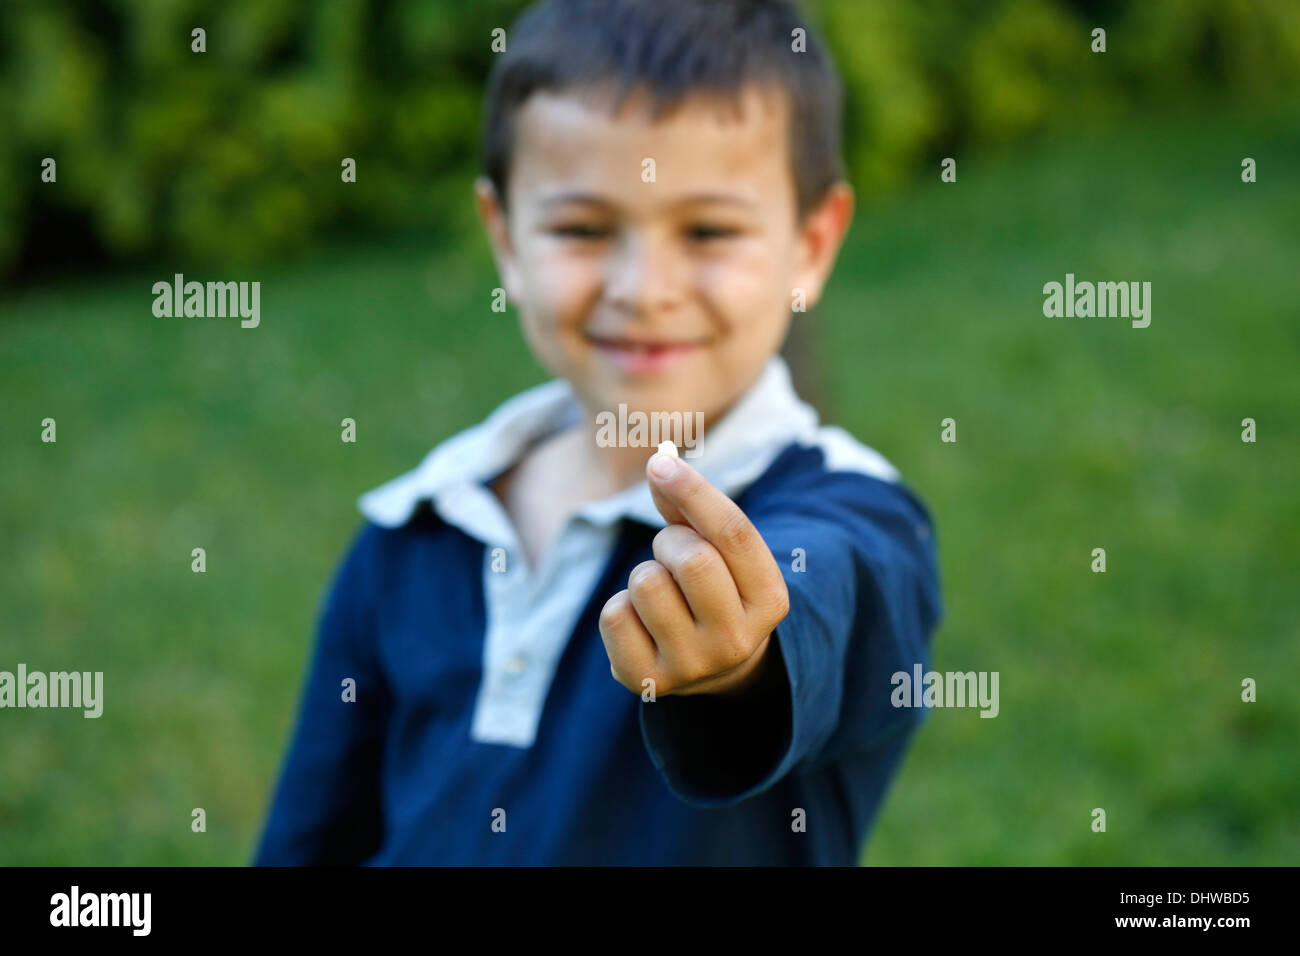 7-year-old boy showing a missing tooth Stock Photo